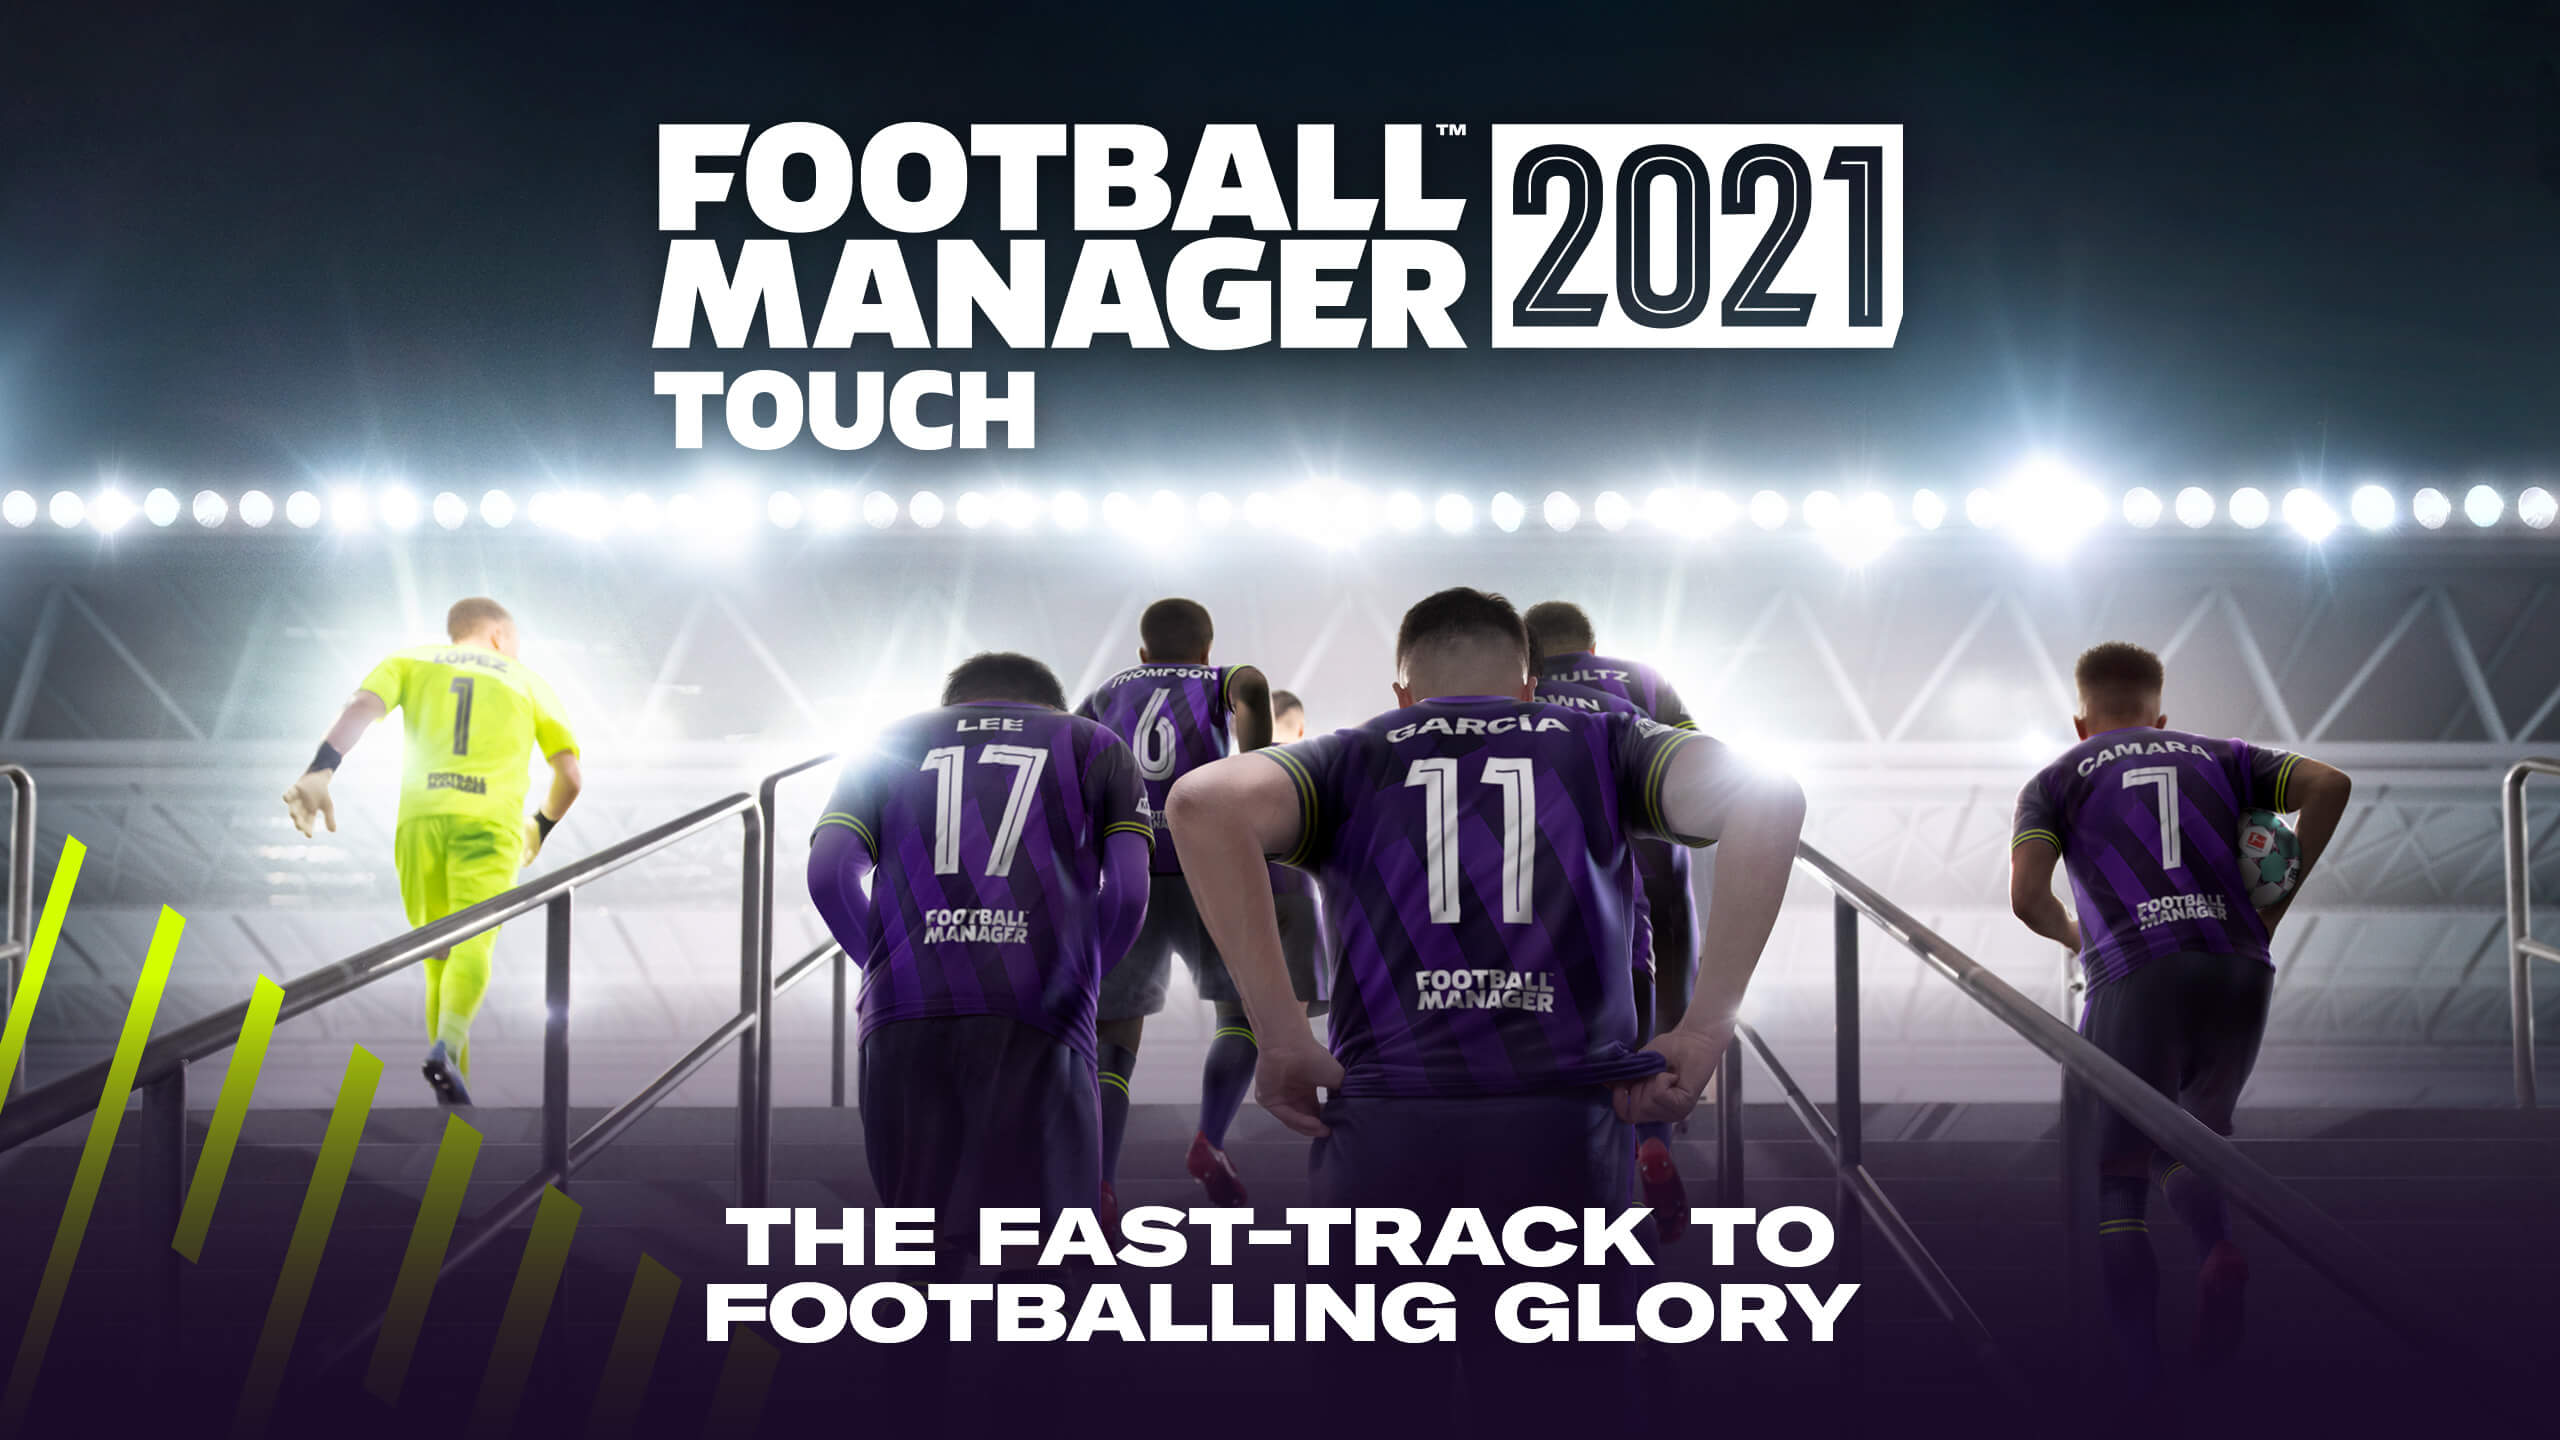 gaming news round-up - football Manager 2021 now on Xbox